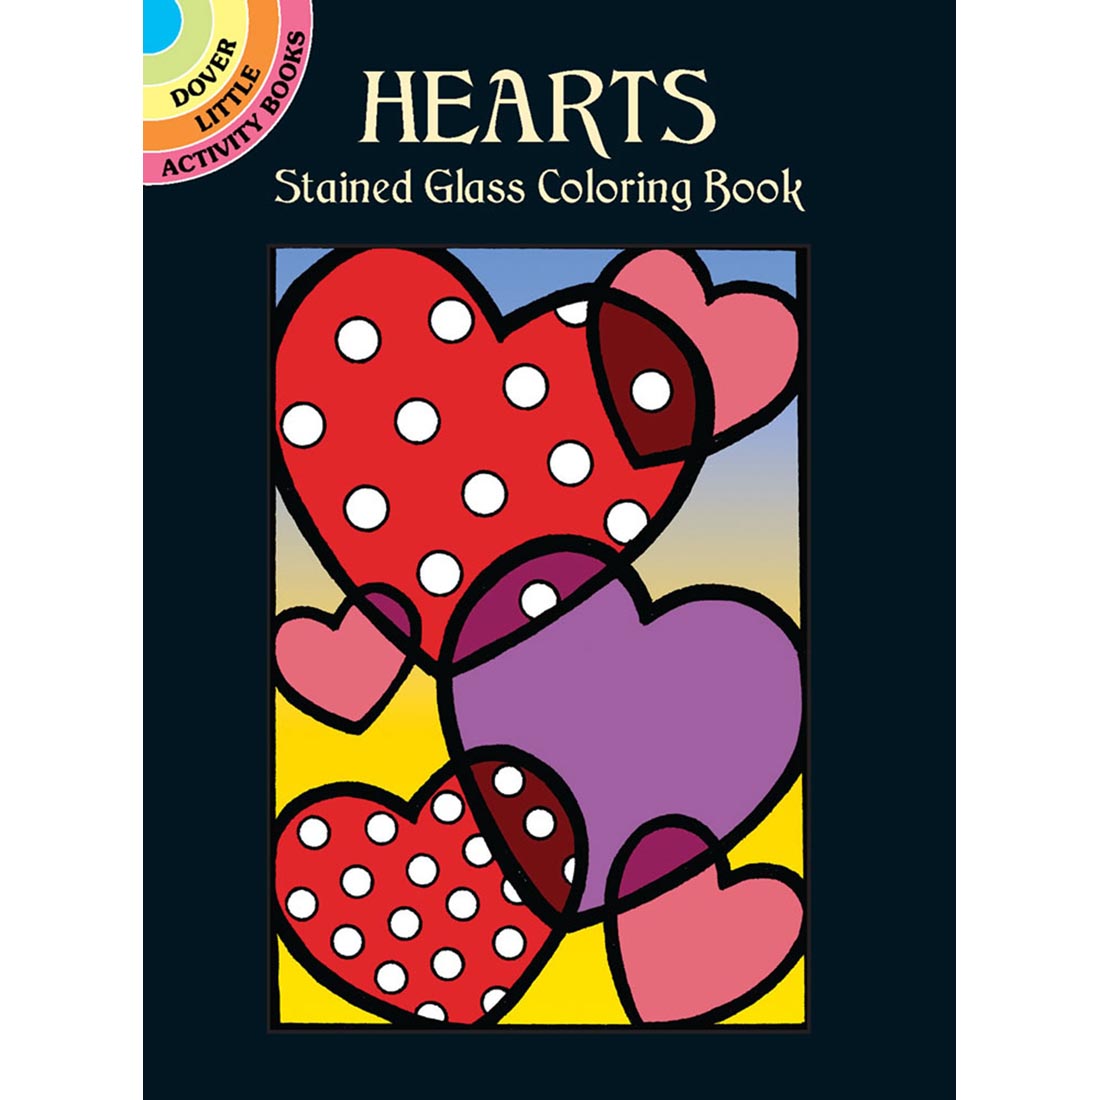 Dover Little Activity Book Hearts Stained Glass Coloring Book